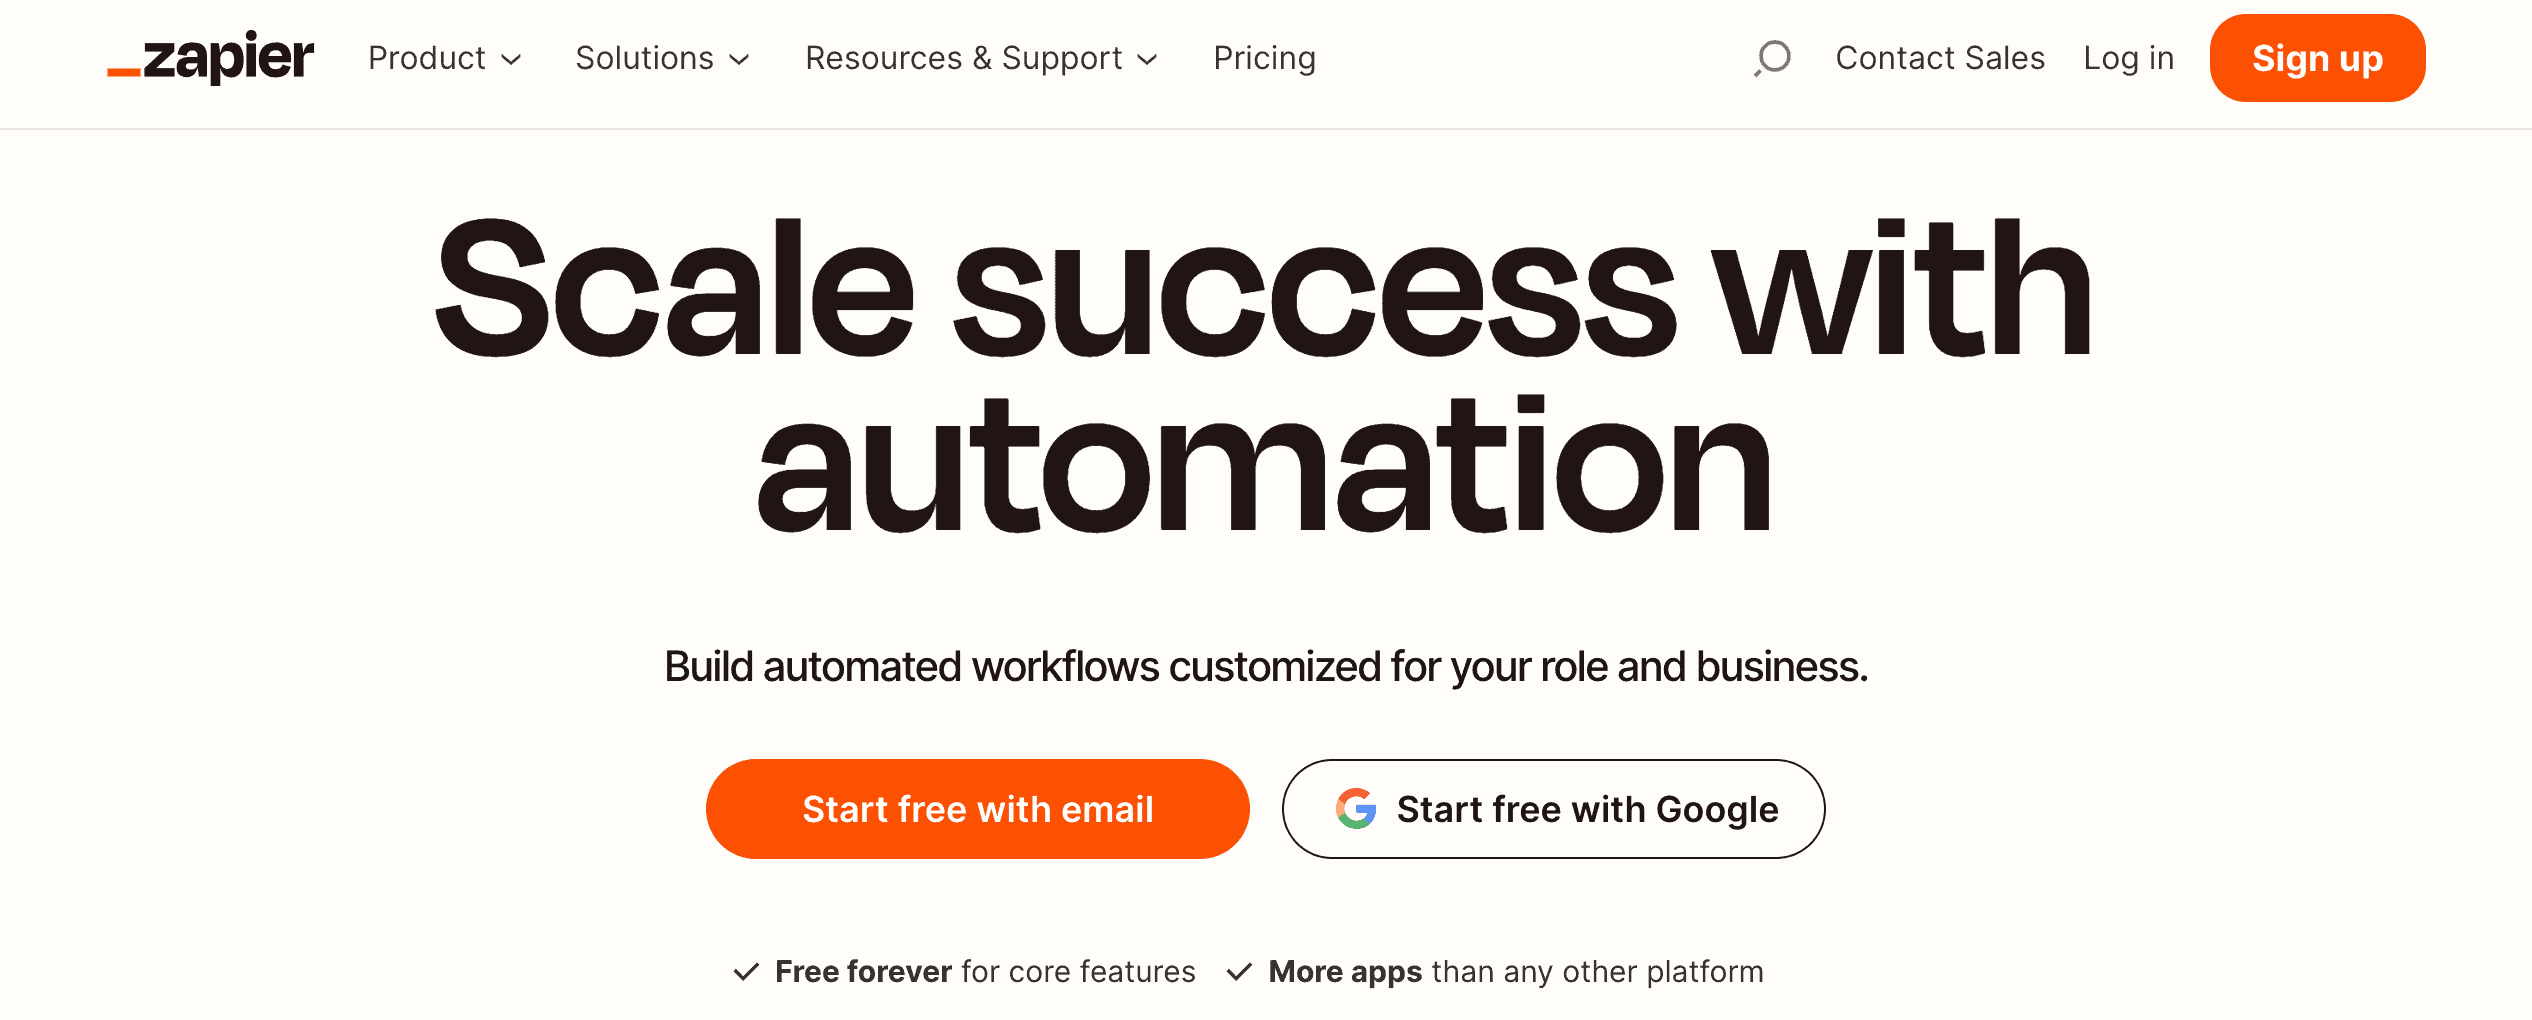 Zapier marketing tool automation for startups 